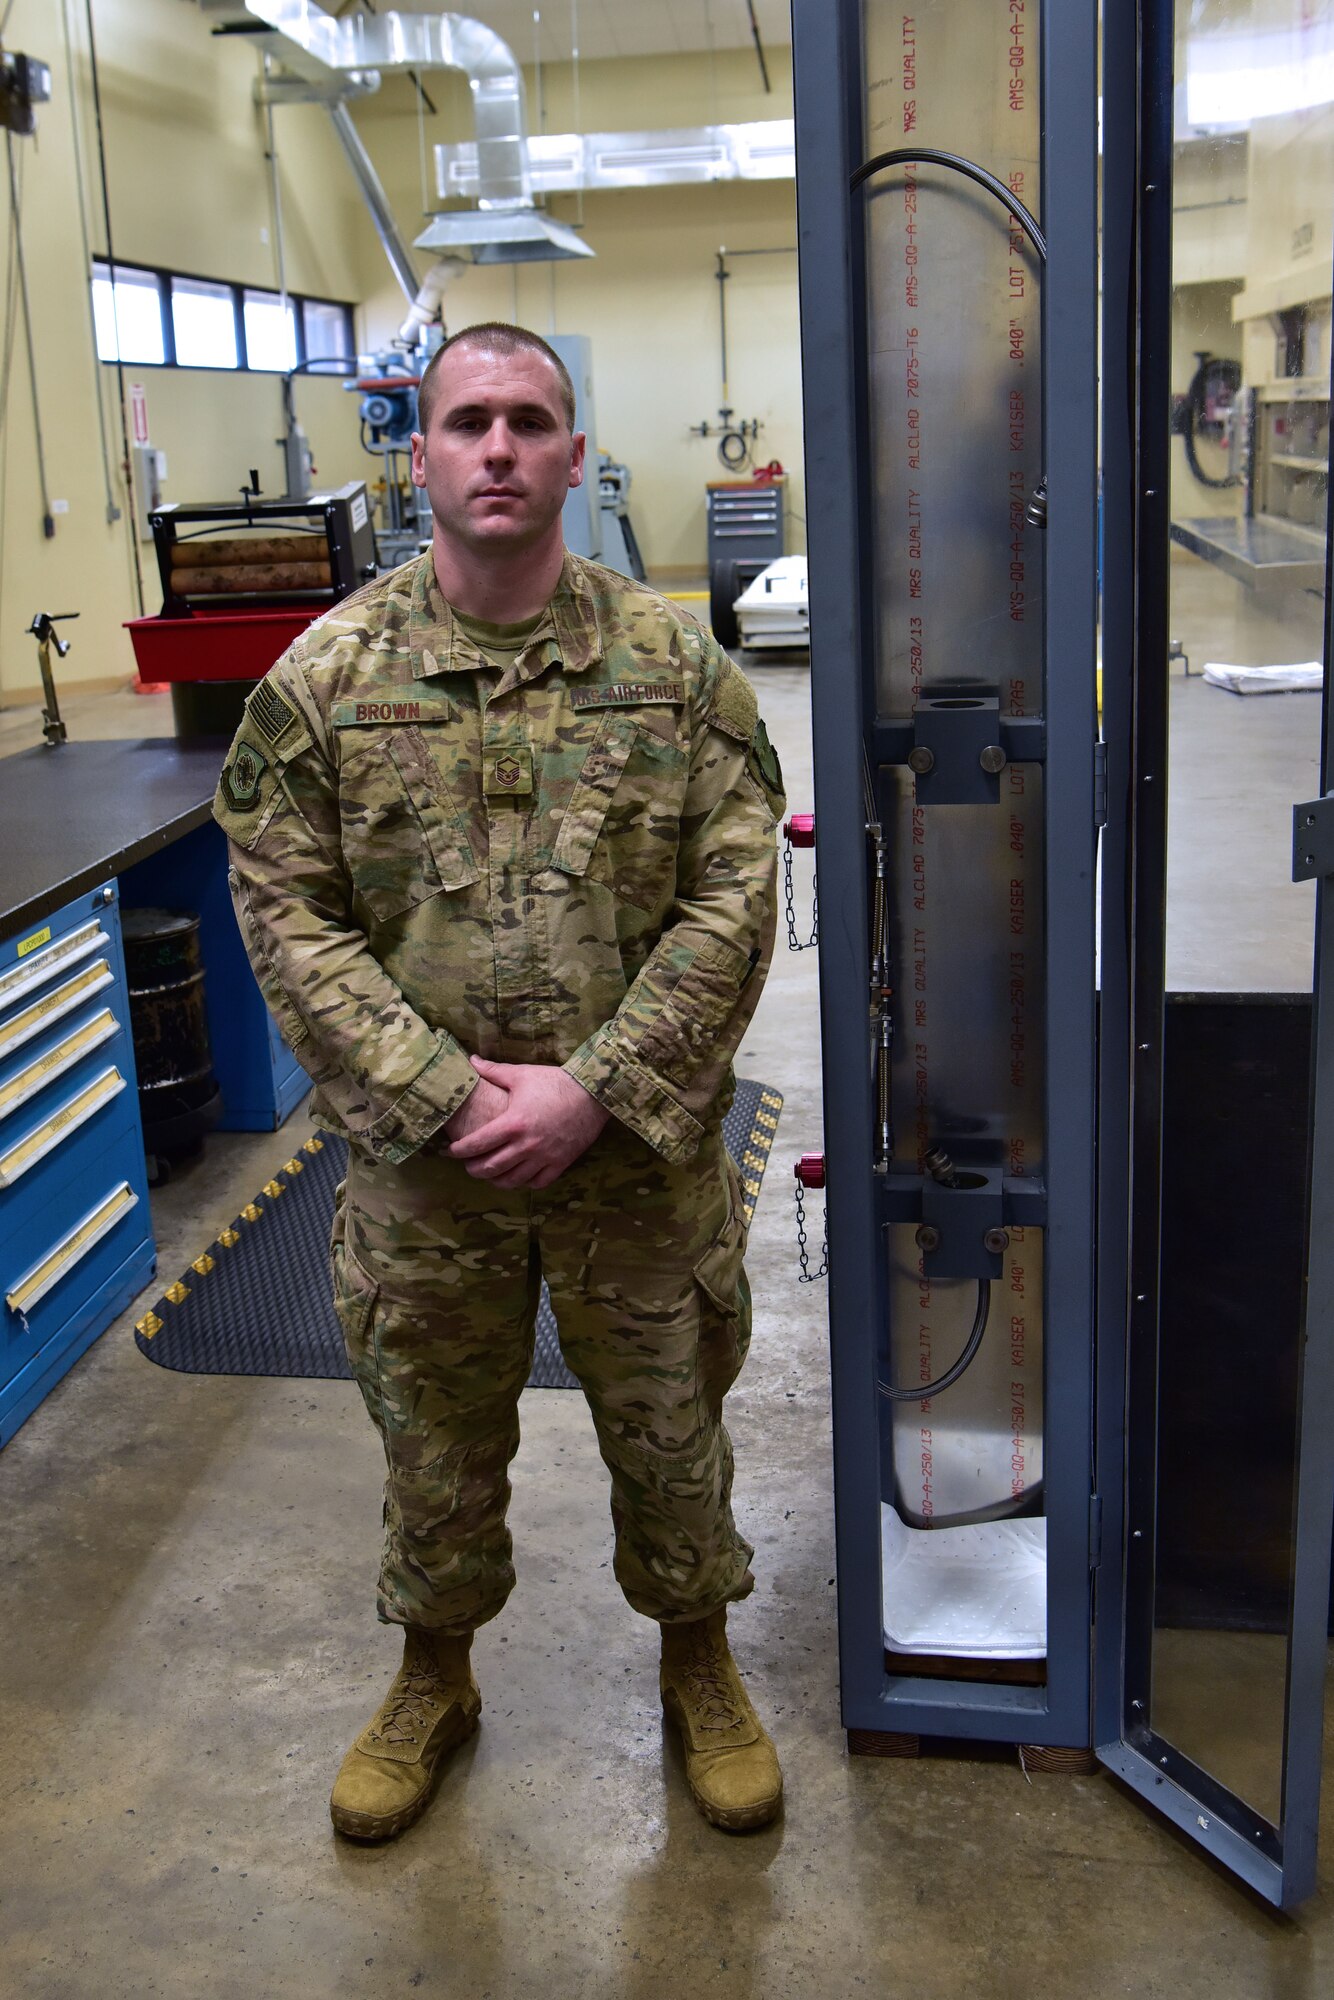 Airman stands next to his safety fixture.